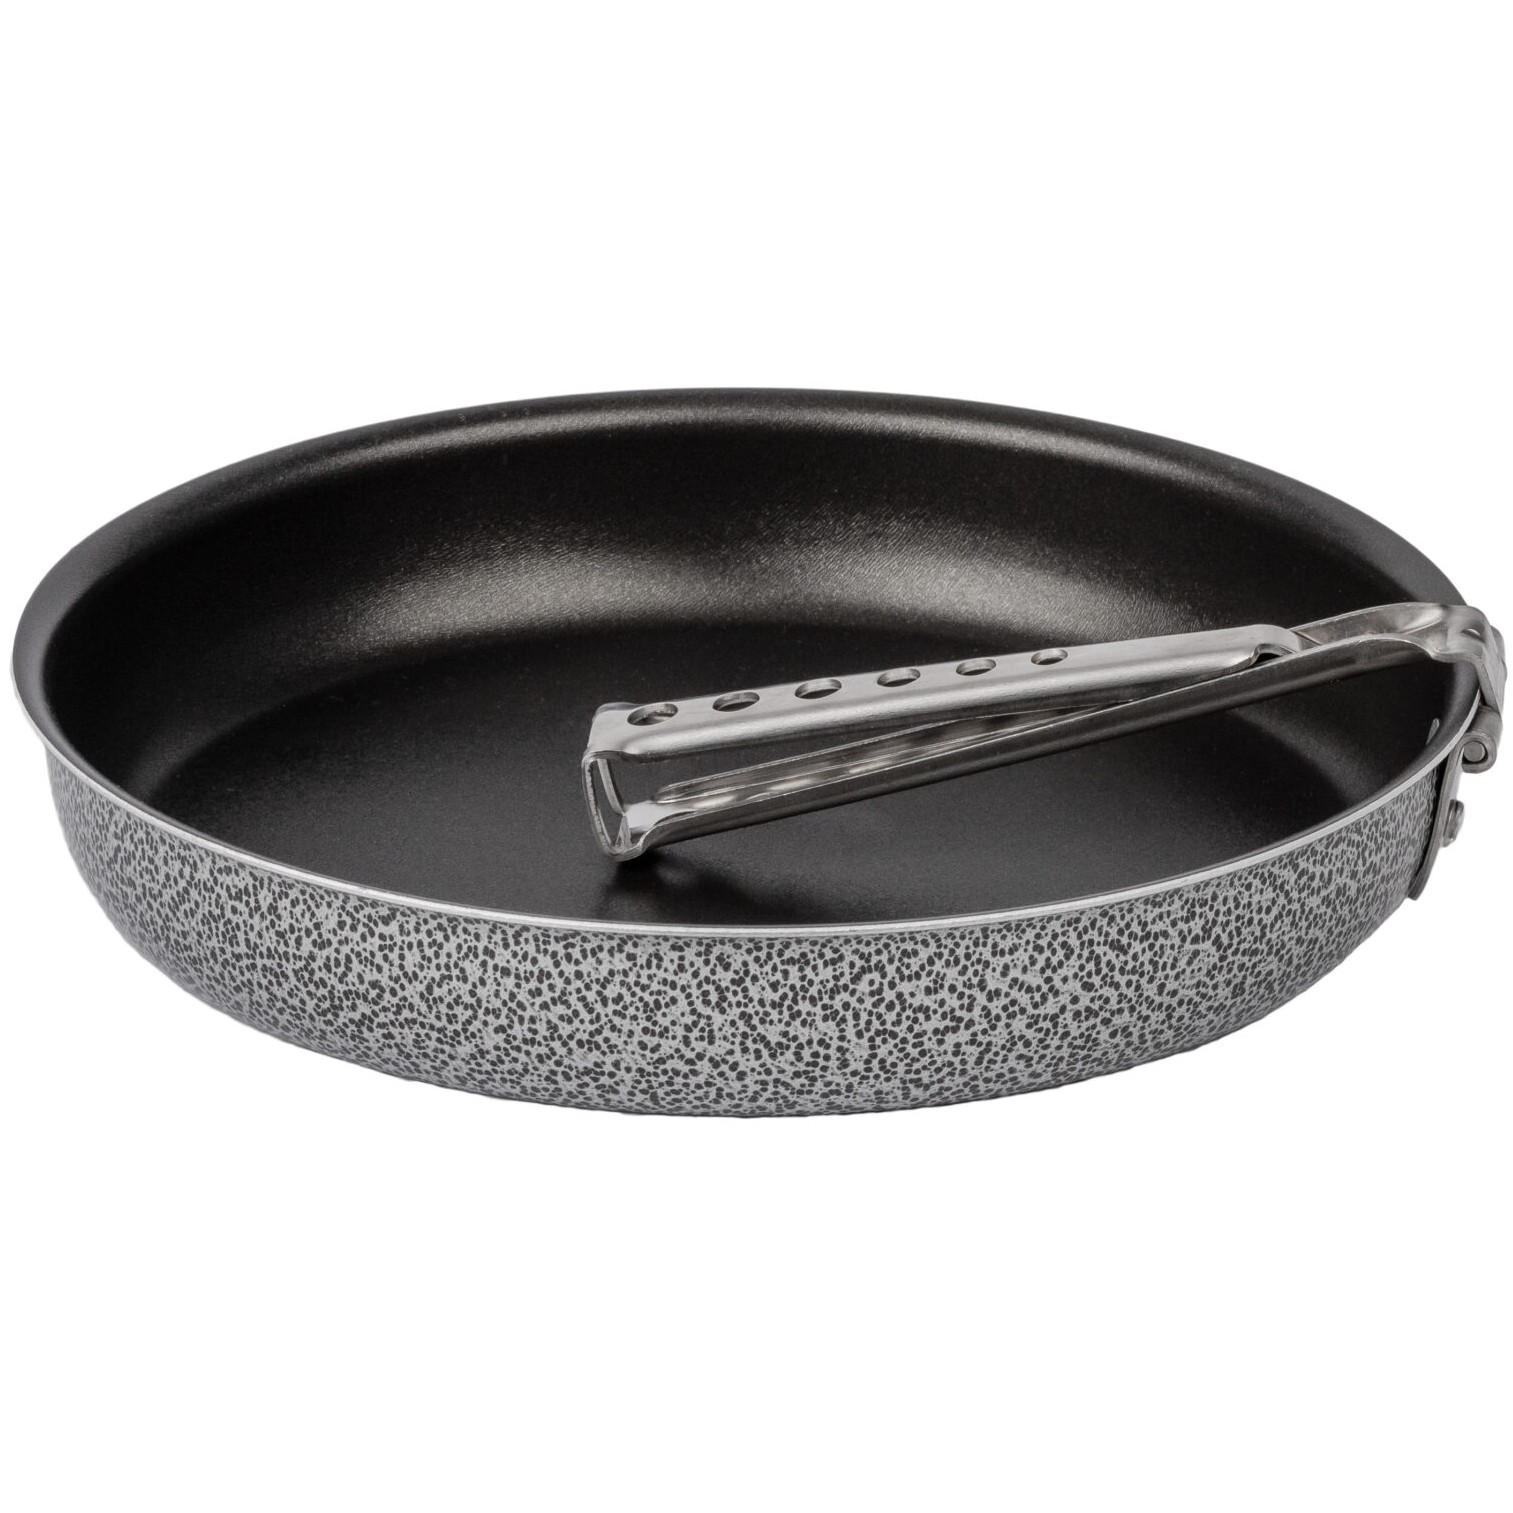 Trangia Non-Stick Frying Pan 725-22 With Folding Handle